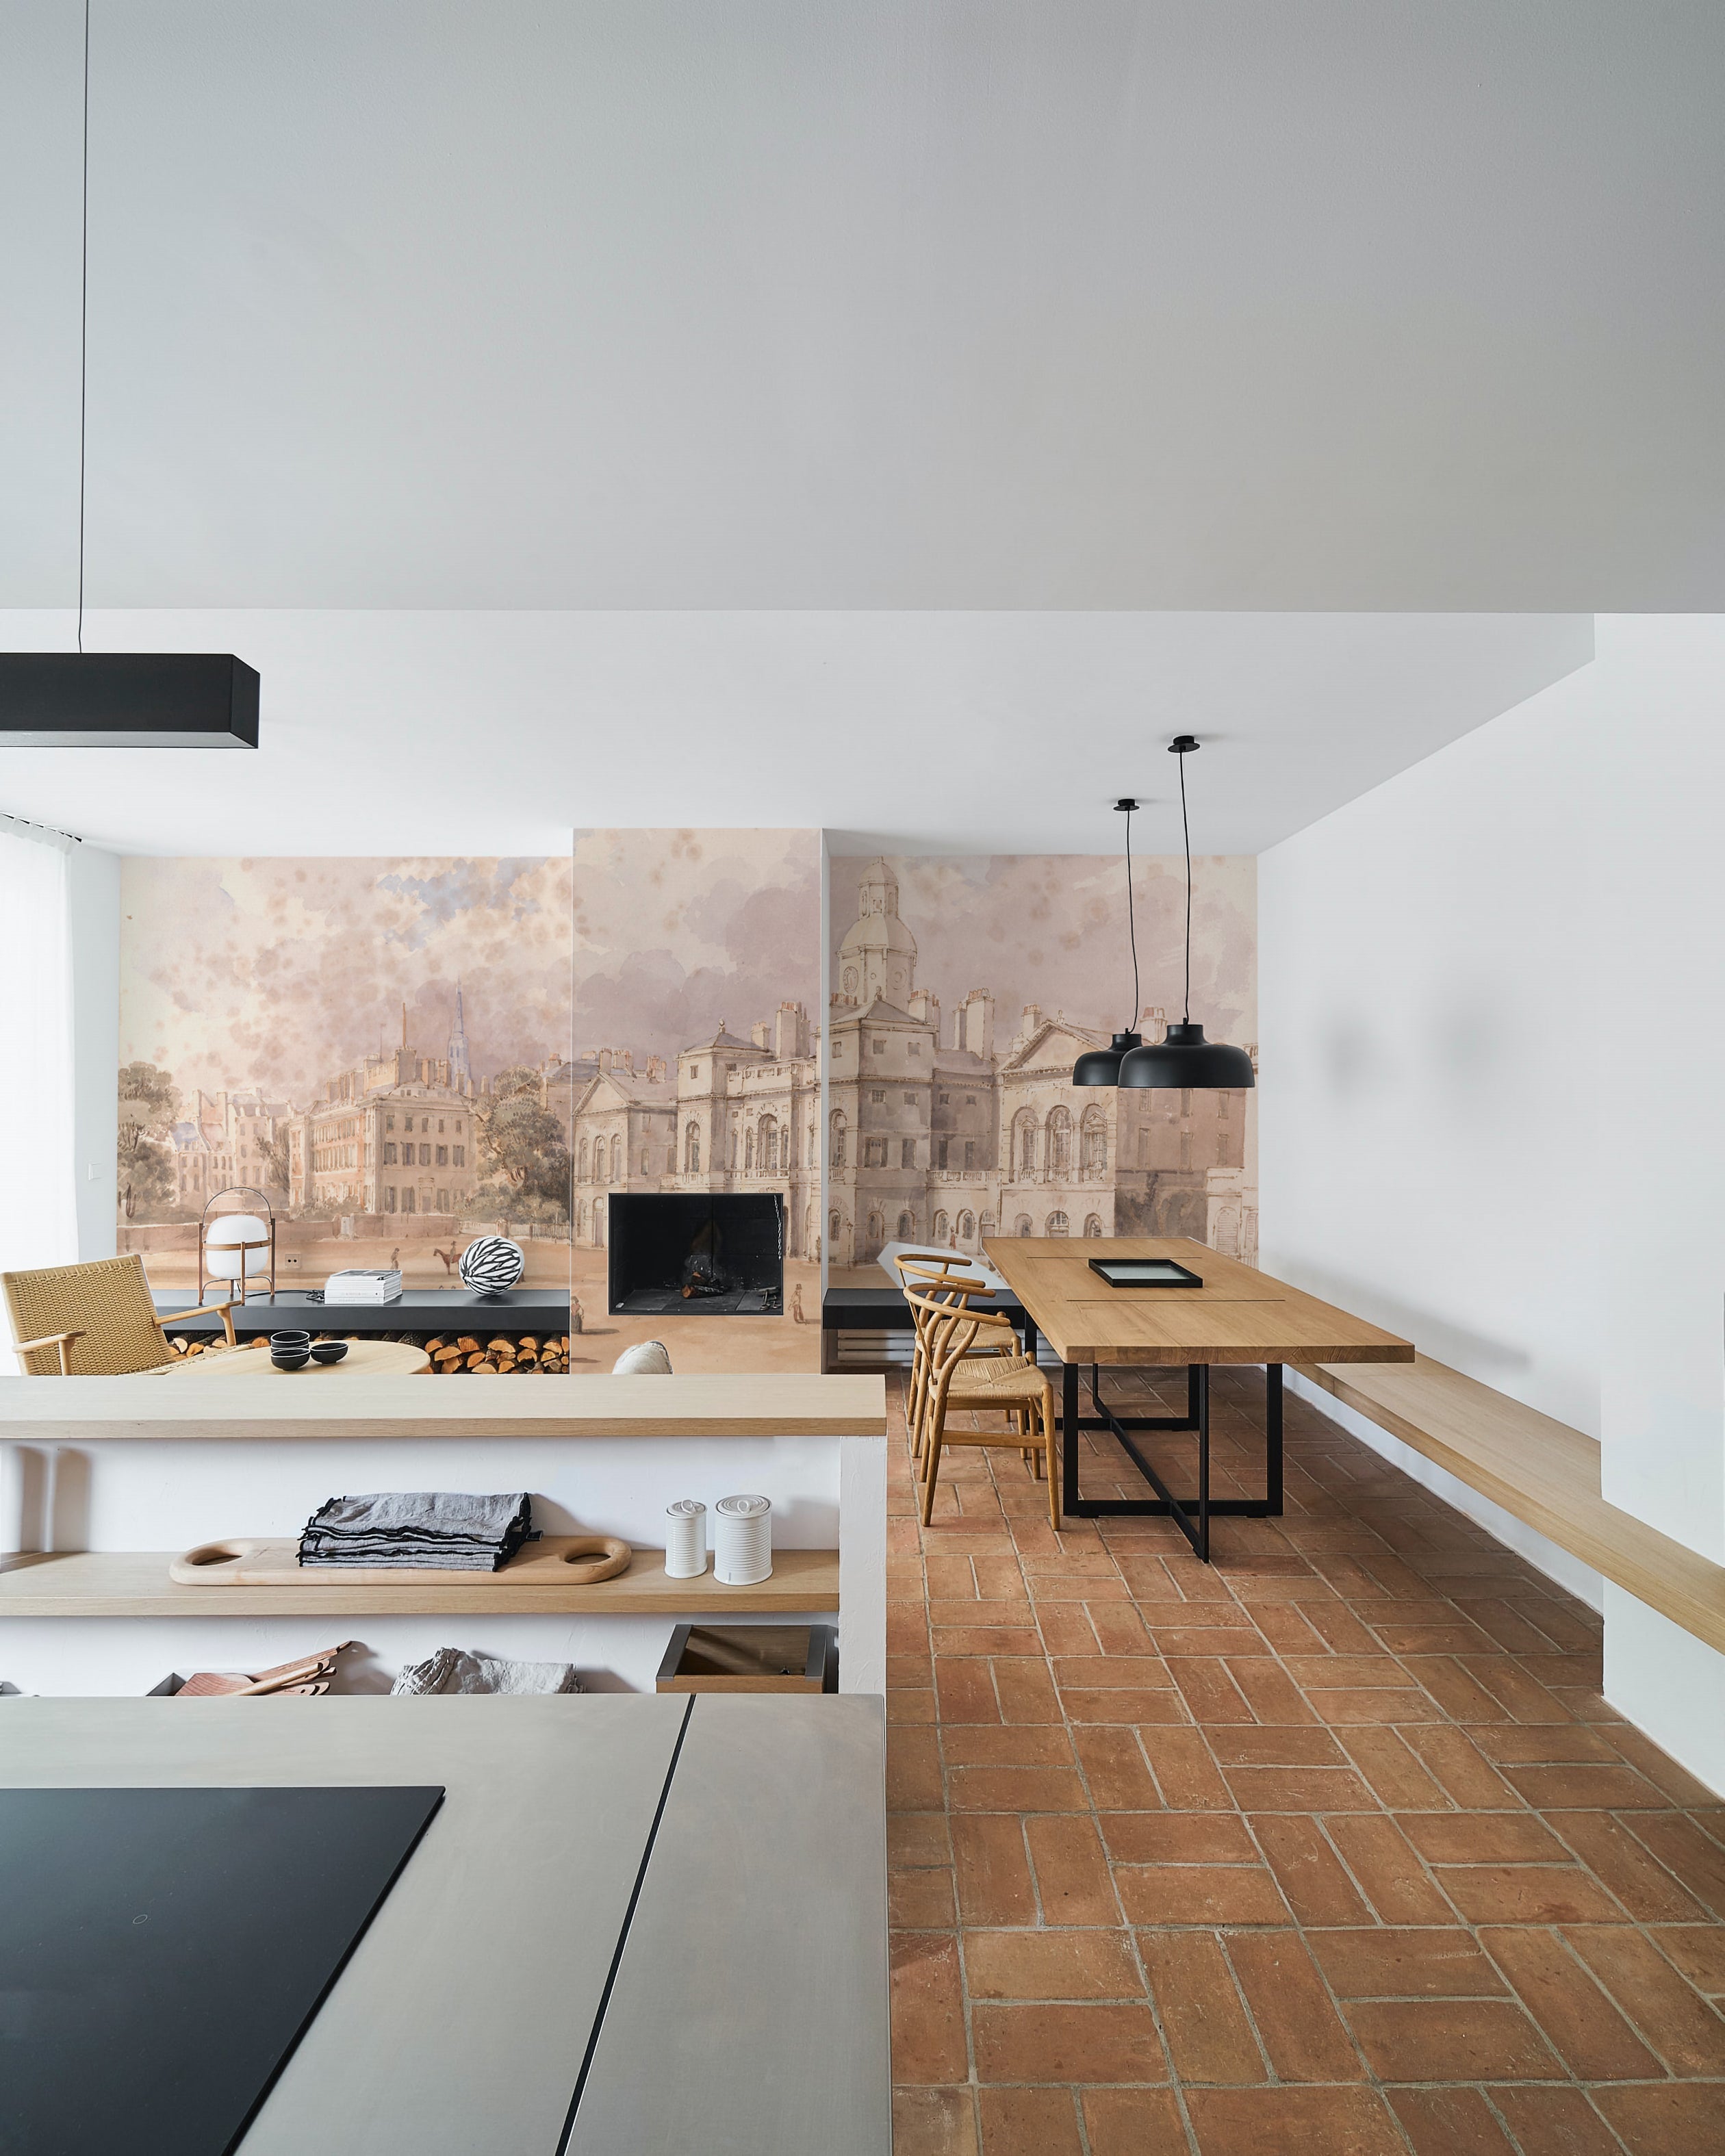 A modern kitchen and dining space fitted with terracotta tiles and contemporary furnishings, complemented by the "Parade" wallpaper mural portraying an antique city square, merging modern living with historical charm.